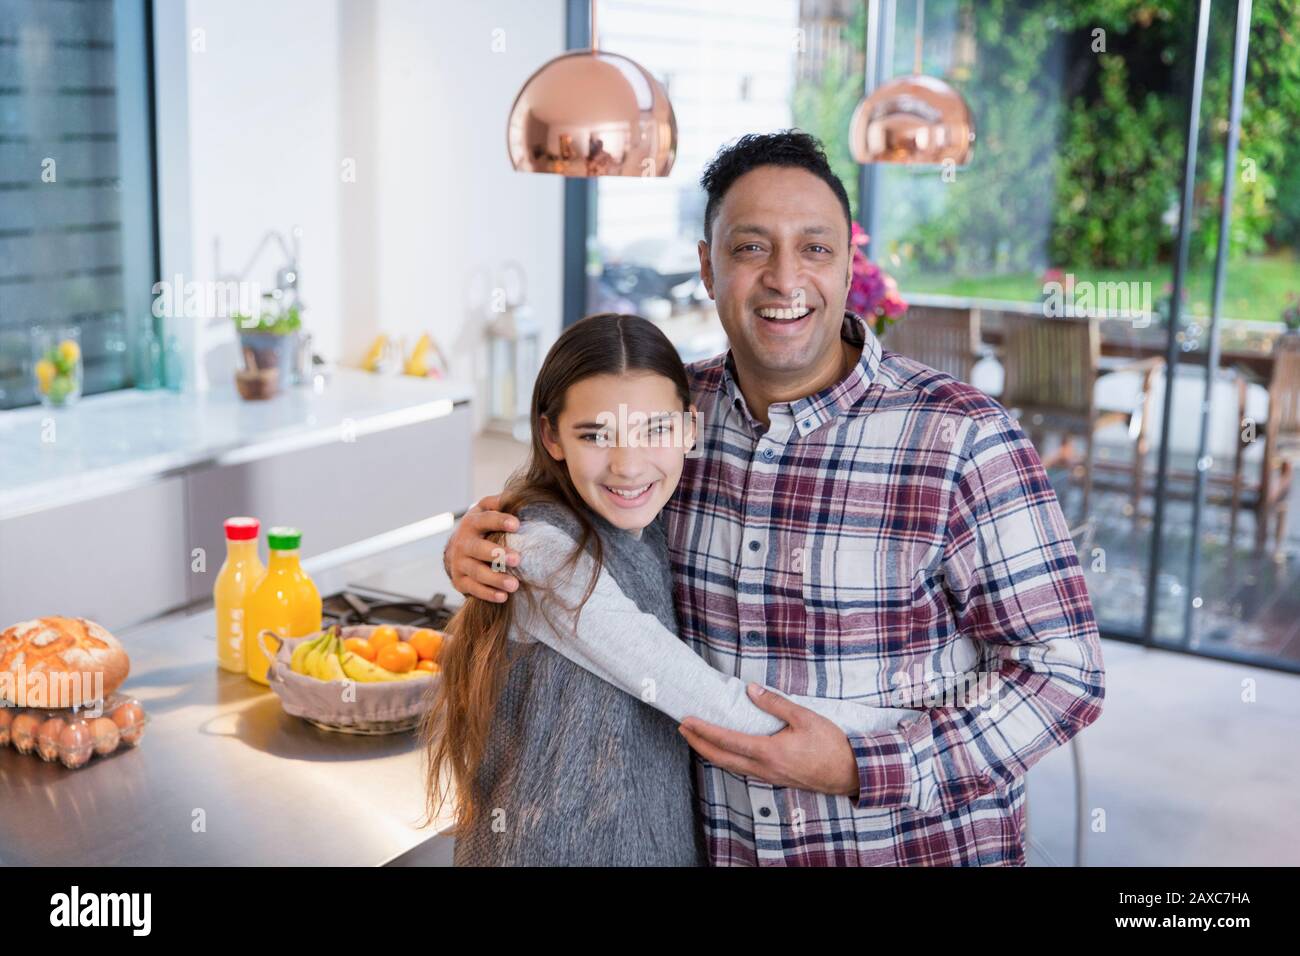 Portrait happy father and daughter hugging in kitchen Stock Photo